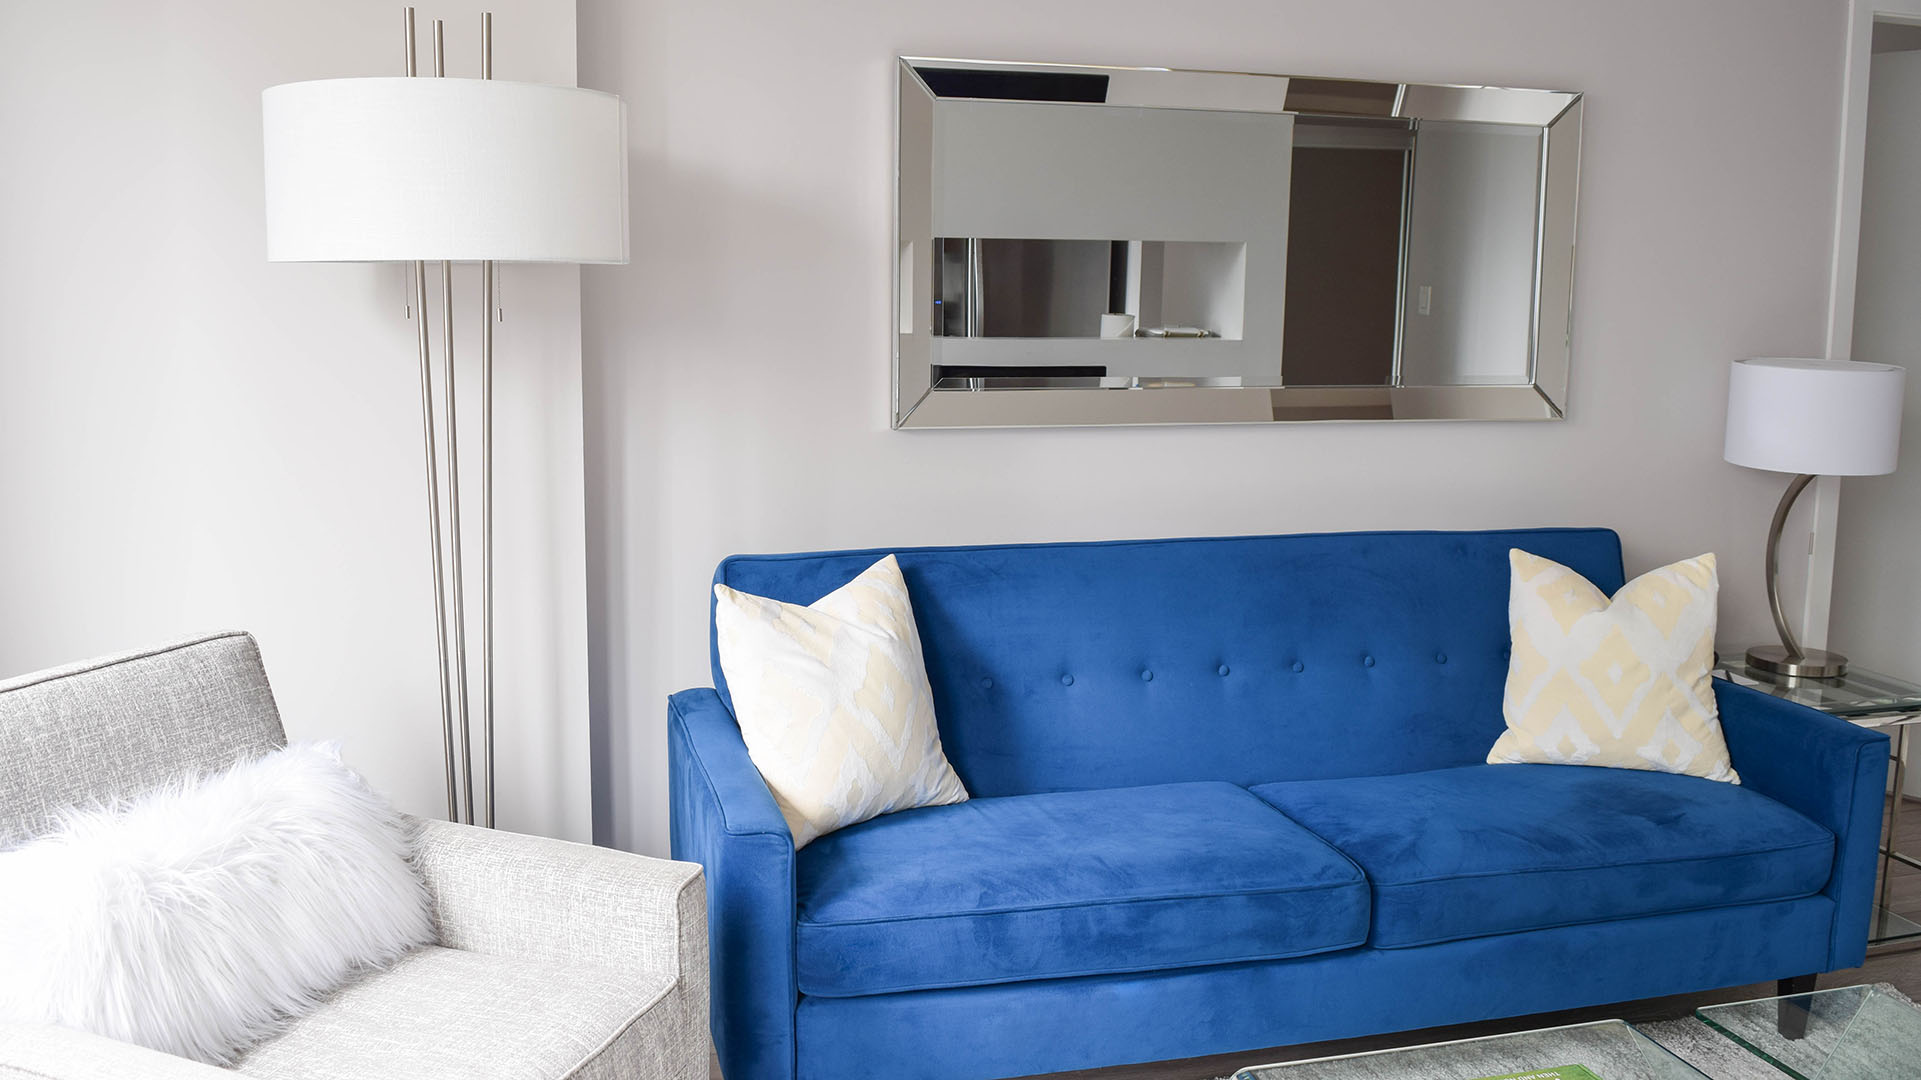 Blue sofa, light grey chair, and a wall mirror in the living room of apartment 302-1288 West Georgia, at the Residences on Georgia.